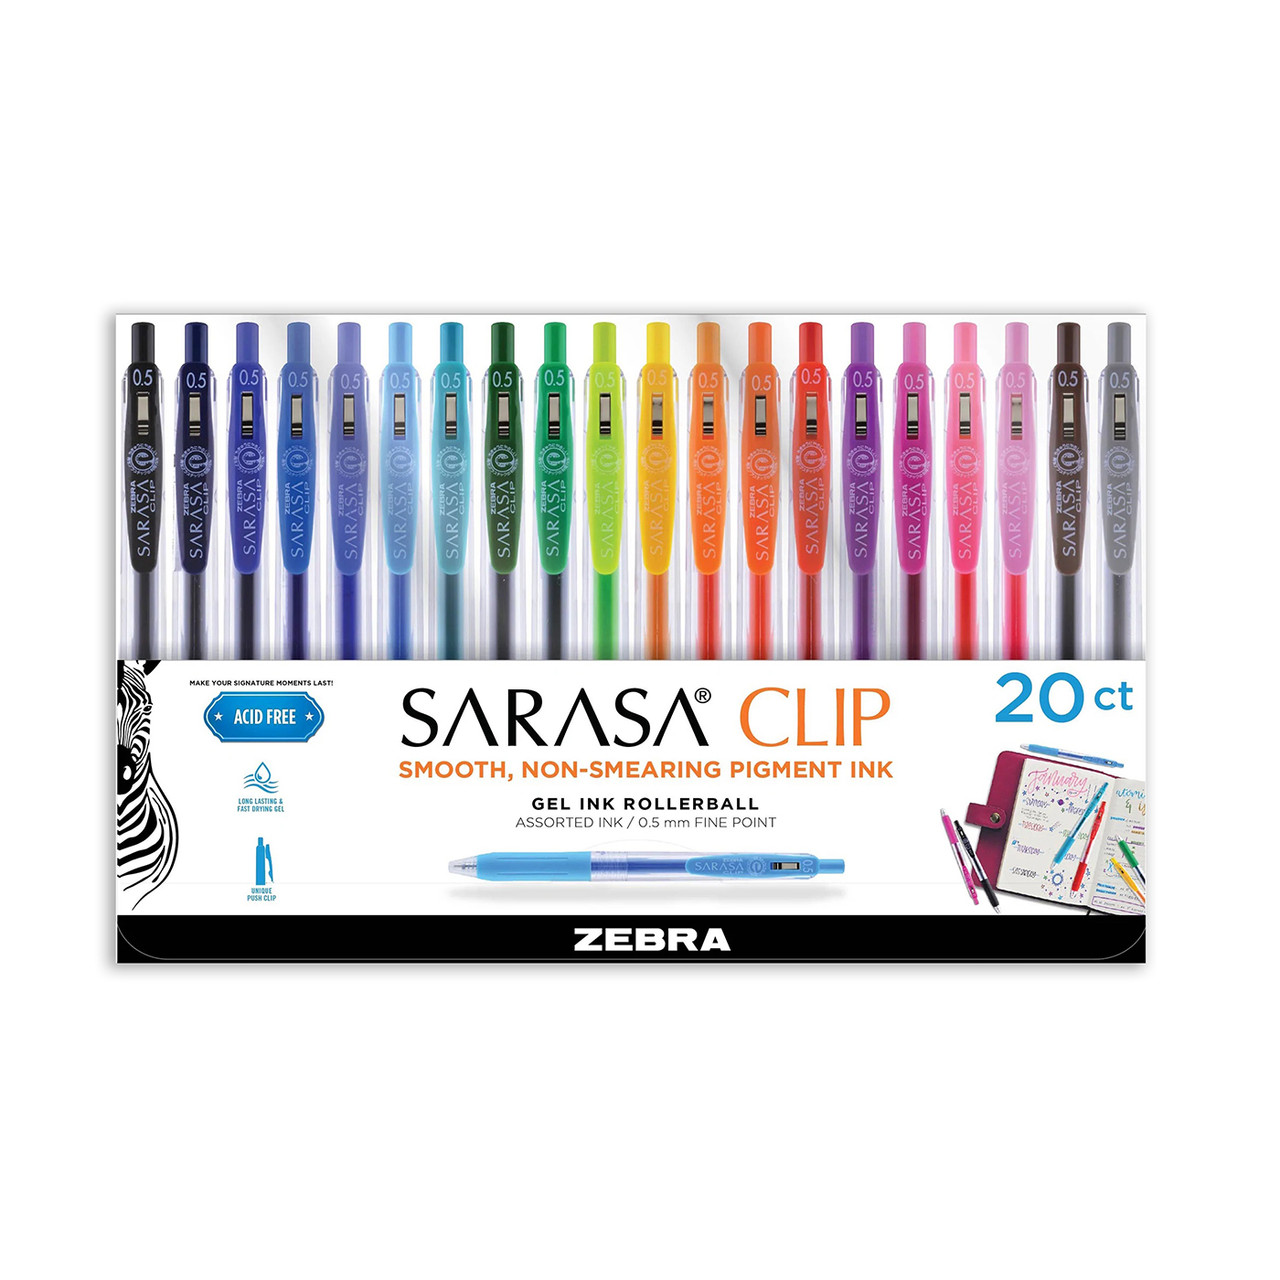 Buy Zebra Pen Products Online at Best Prices in India